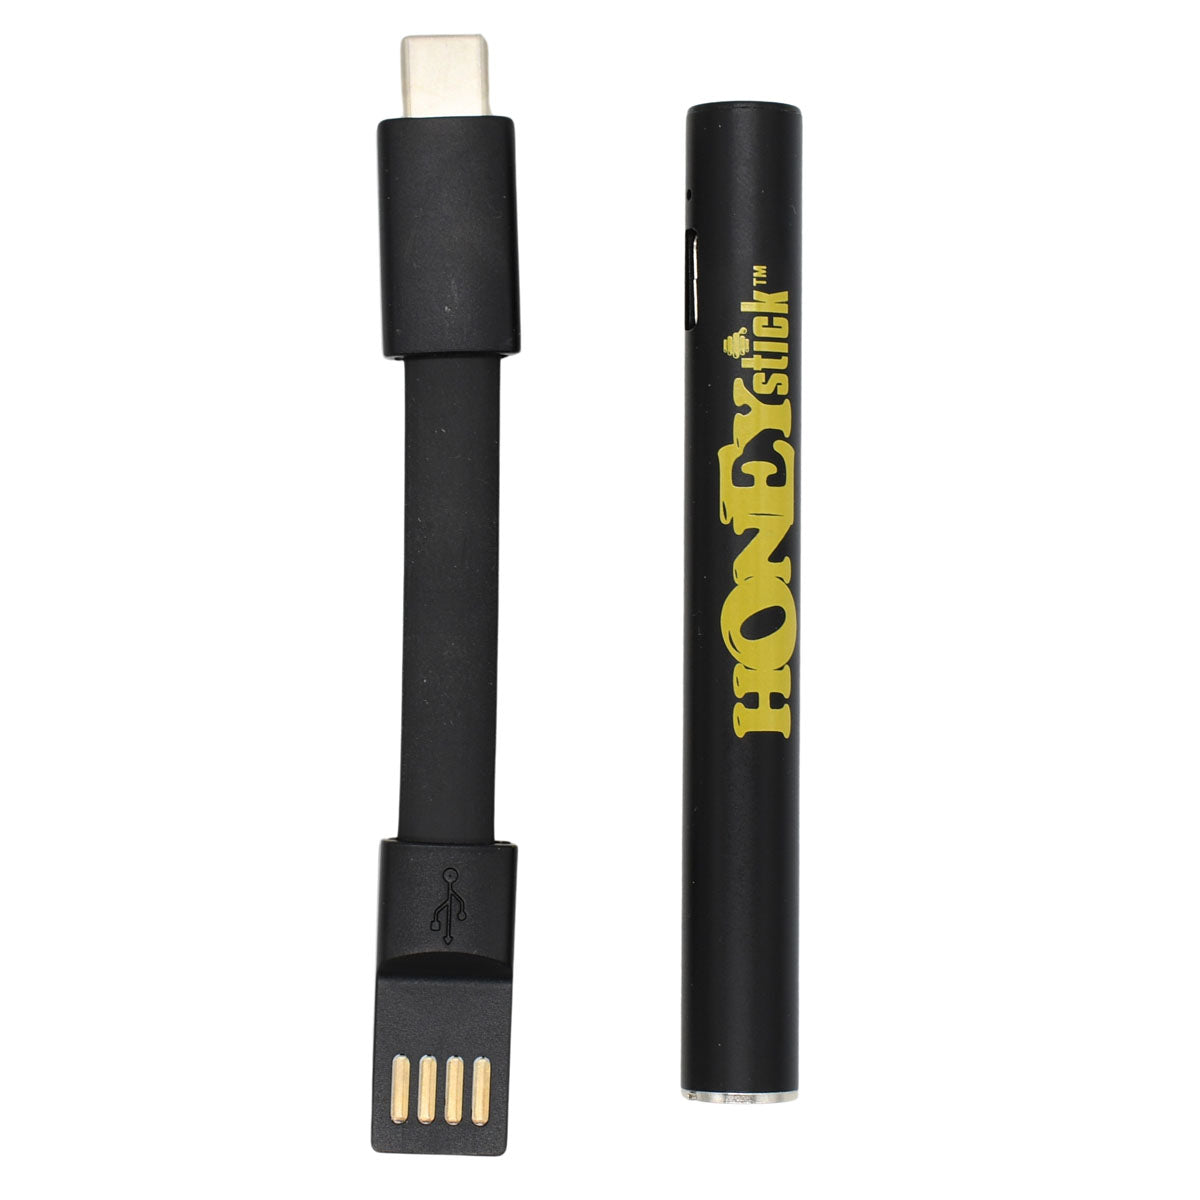 510 Battery and USB-C charging cable